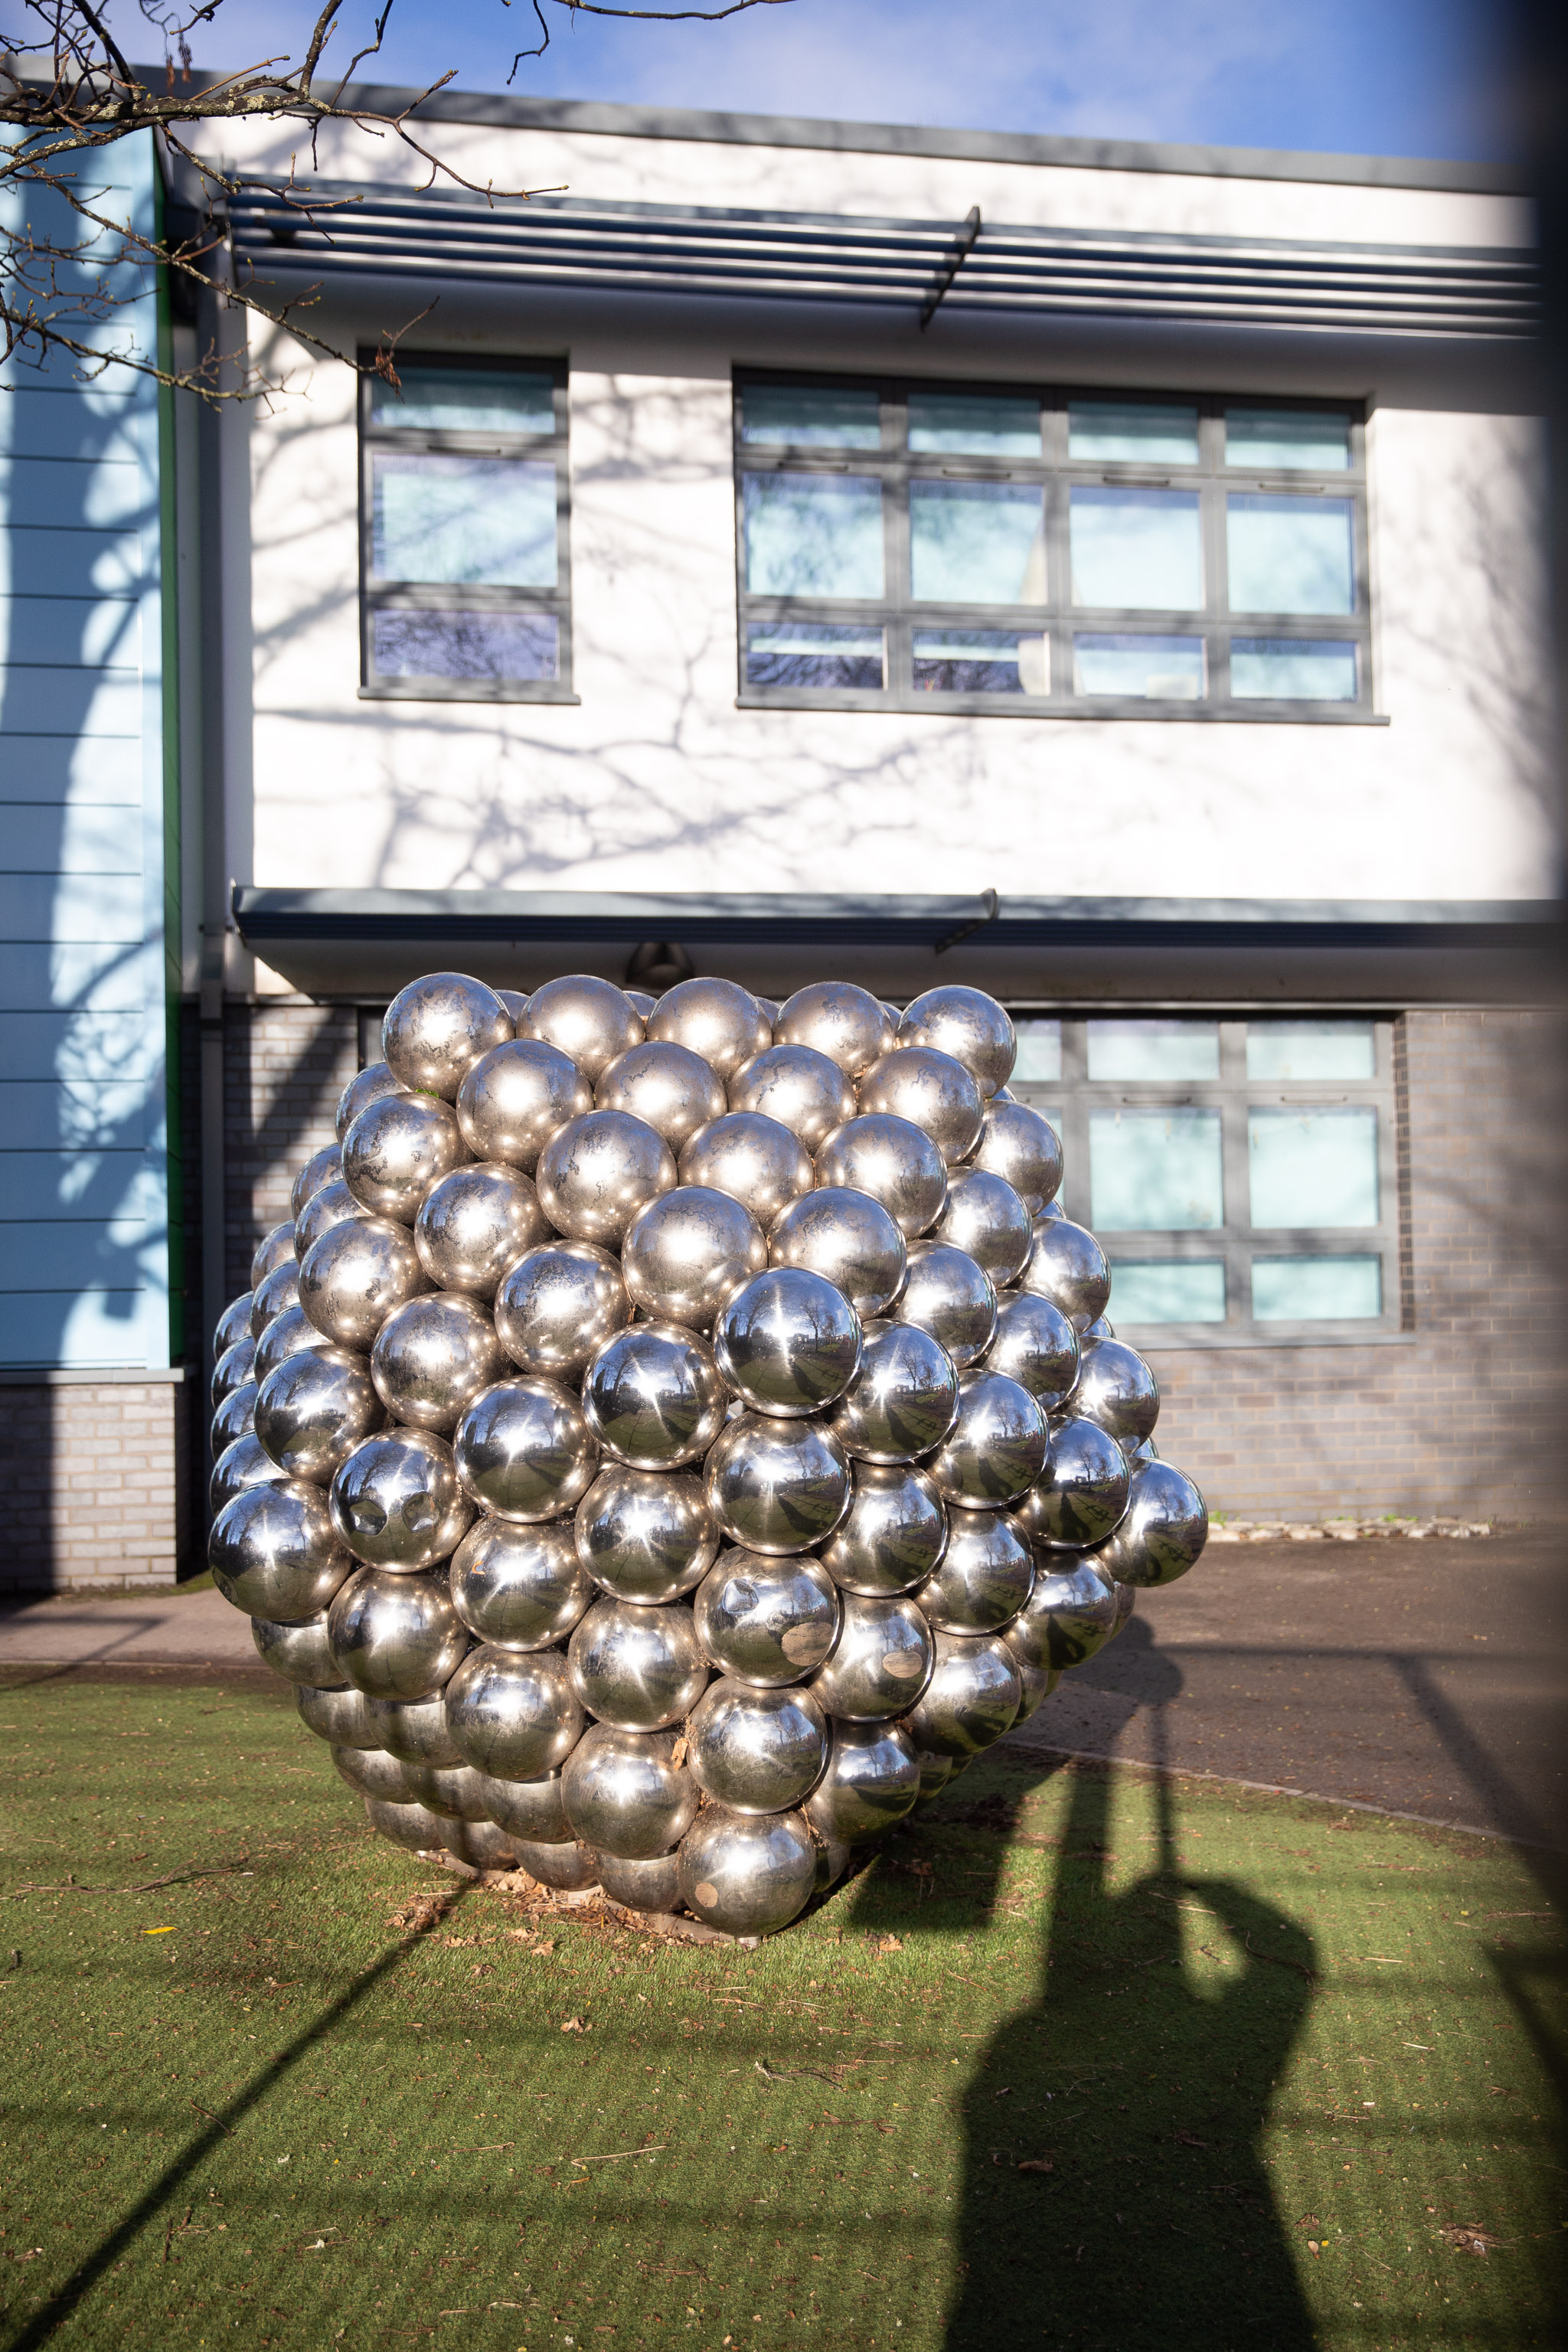 Balls
In the grounds of Southville Primary School. Some kind of crystalline atomic structure?
